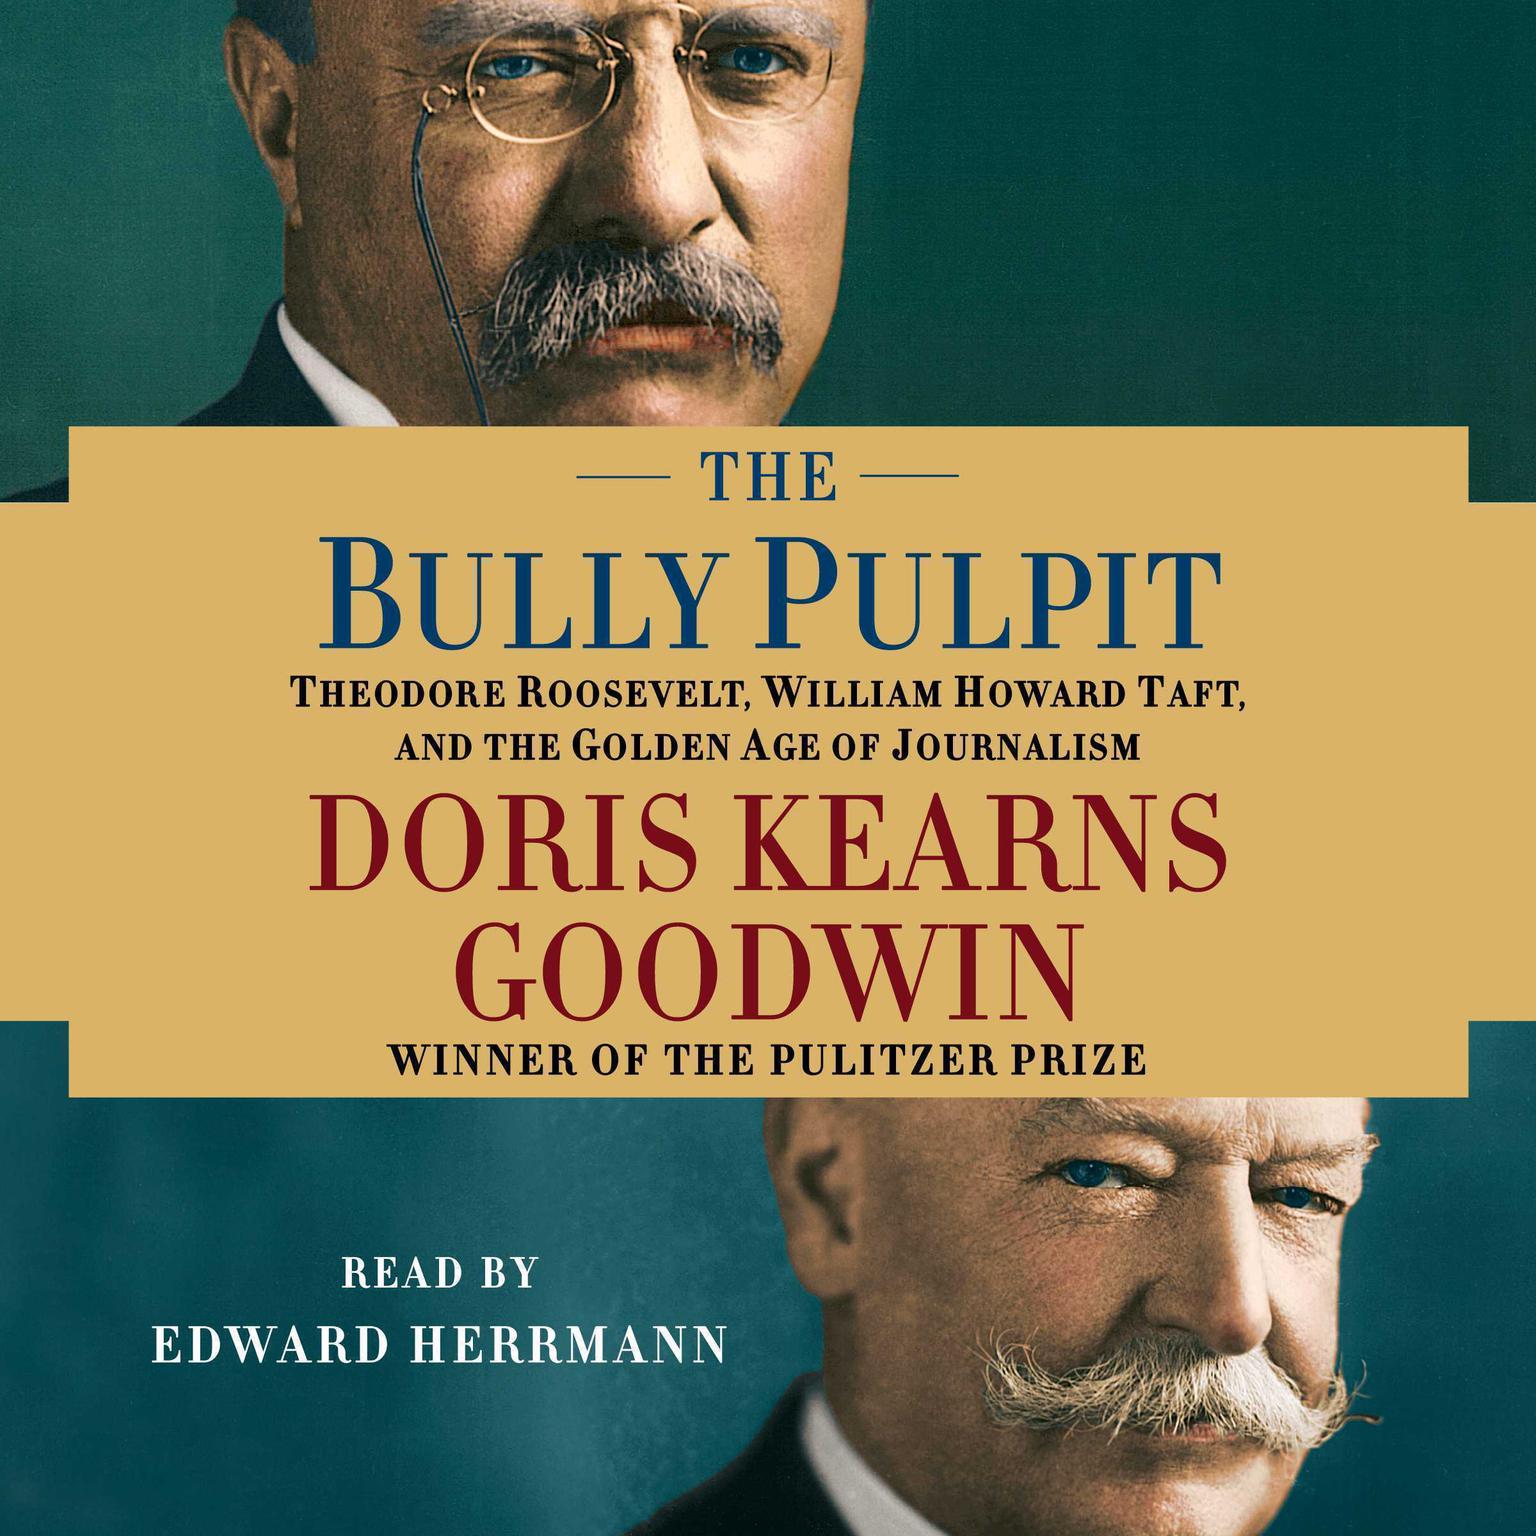 The Bully Pulpit (Abridged): Theodore Roosevelt, William Howard Taft, and the Golden Age of Journalism Audiobook, by Doris Kearns Goodwin